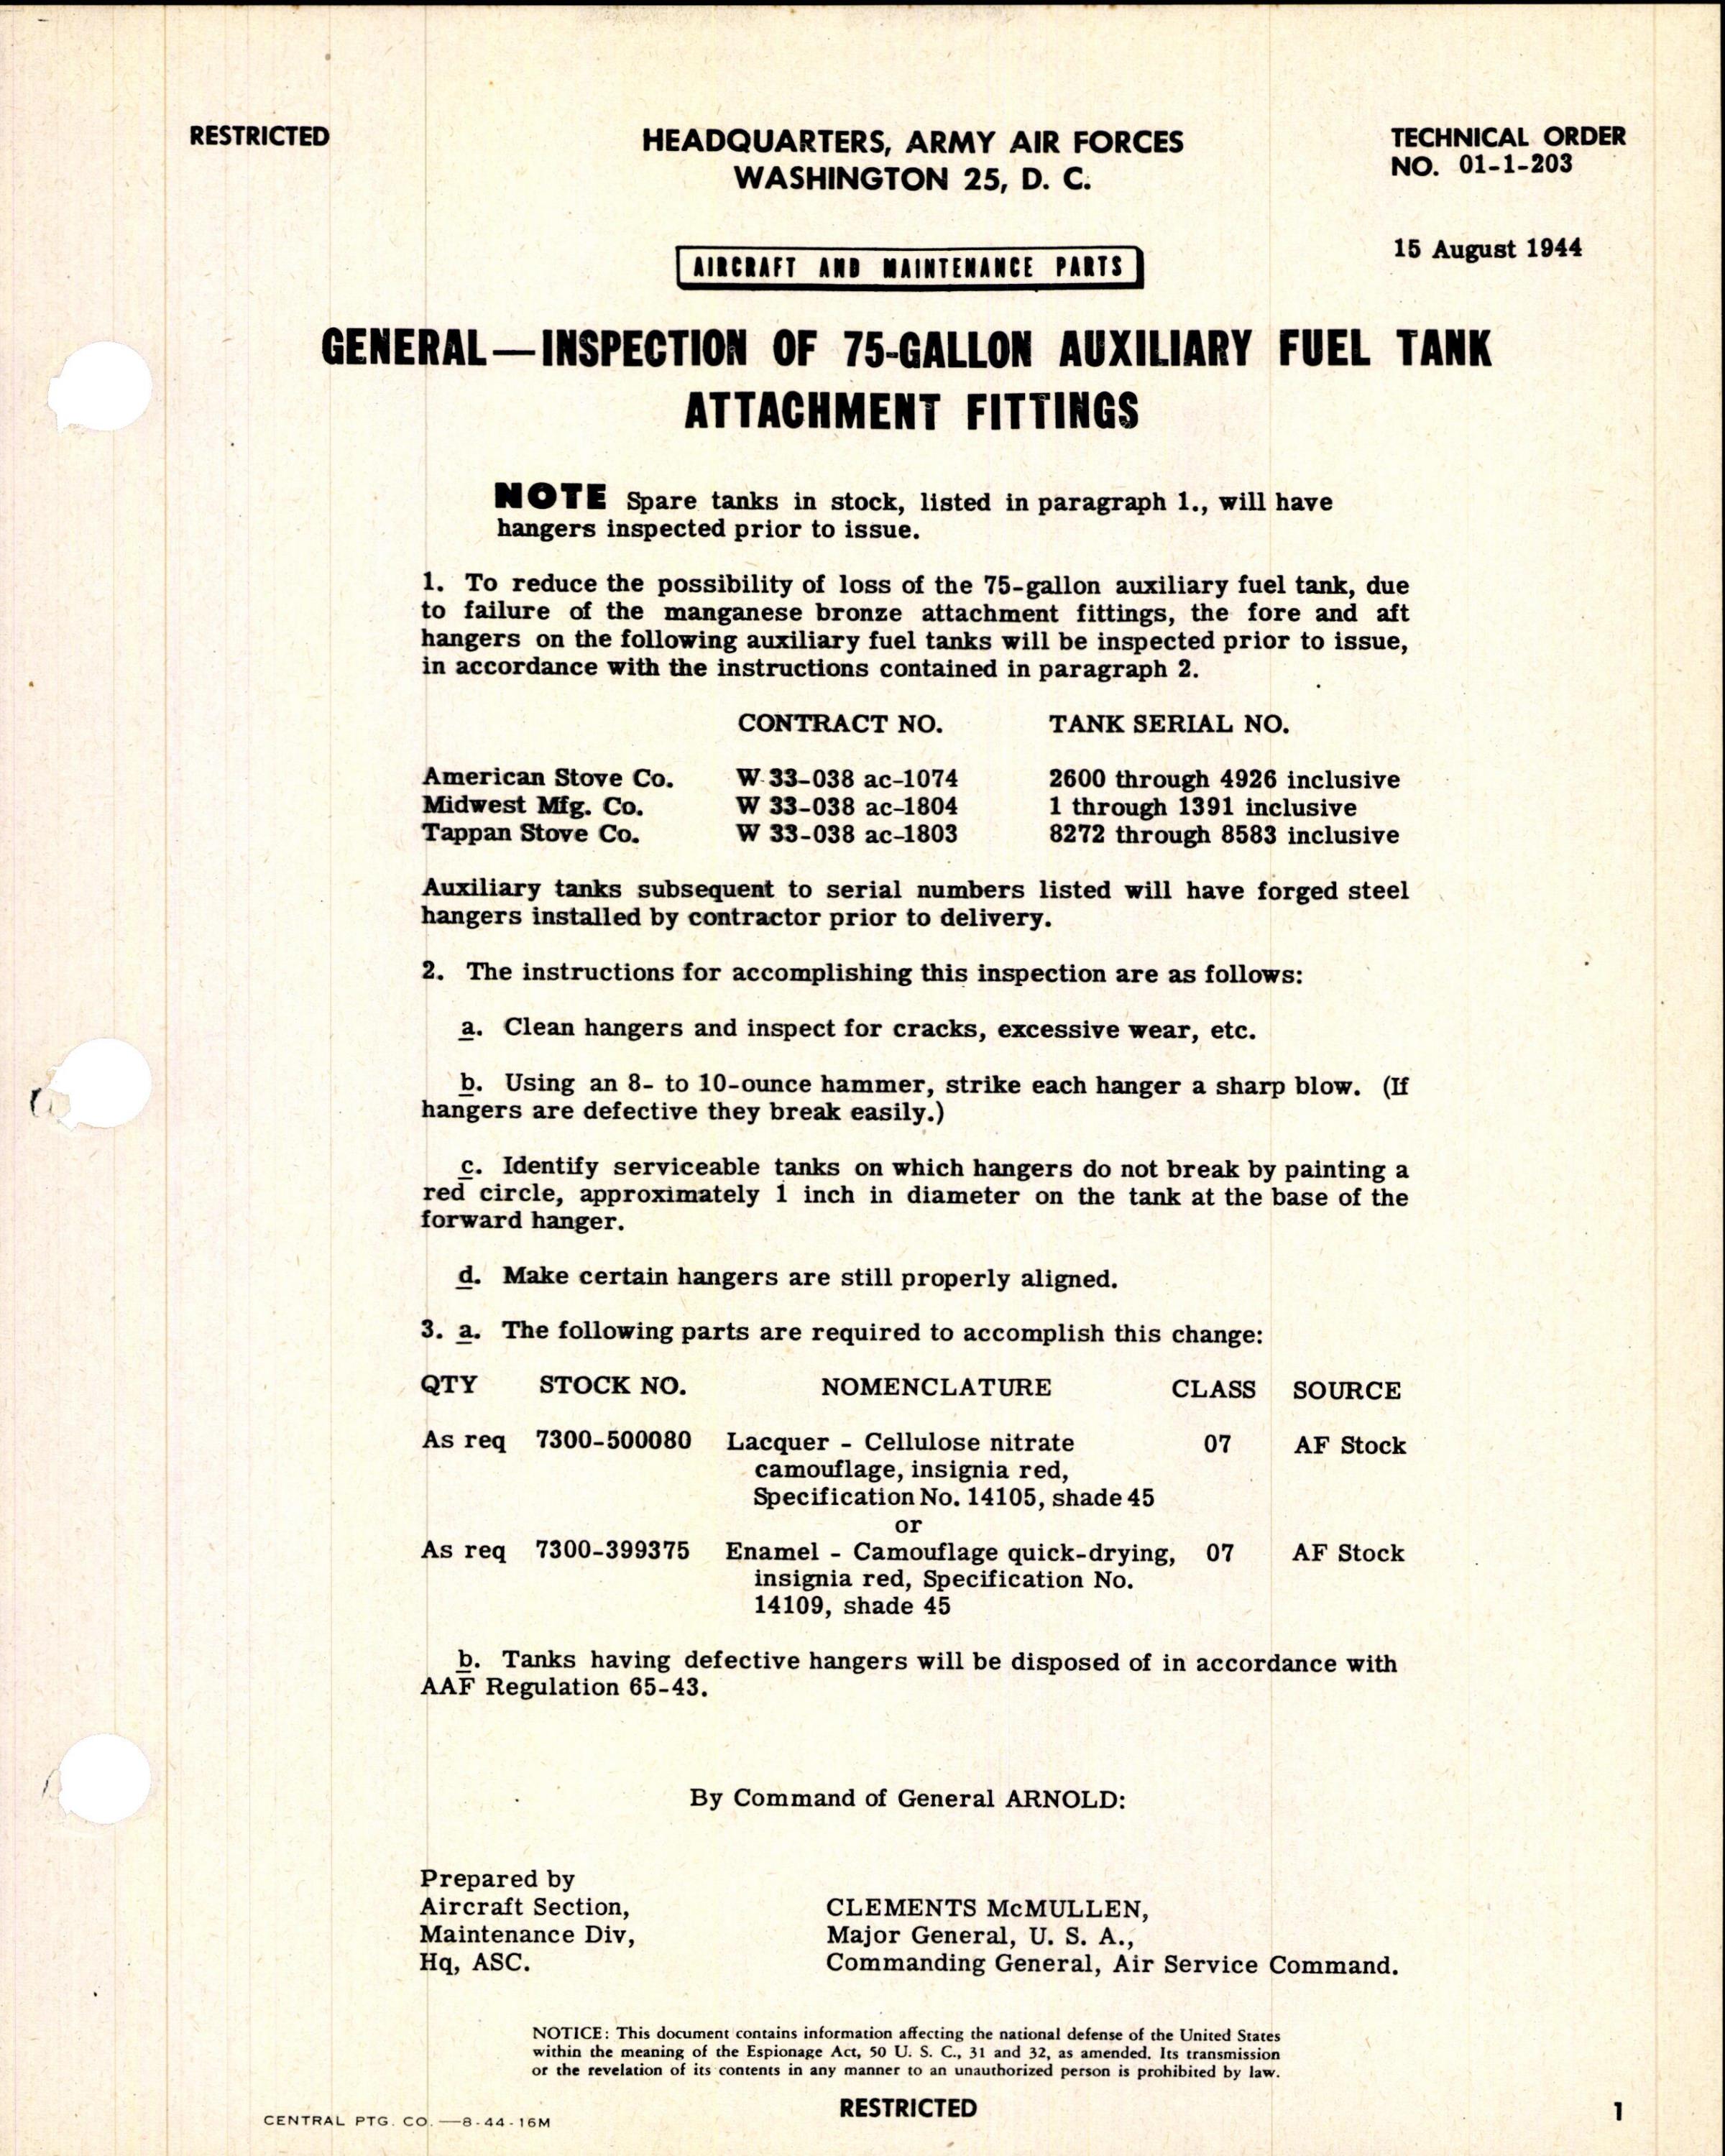 Sample page 1 from AirCorps Library document: Inspection of 75-Gallon Auxiliary Fuel Tank Attachment Fittings